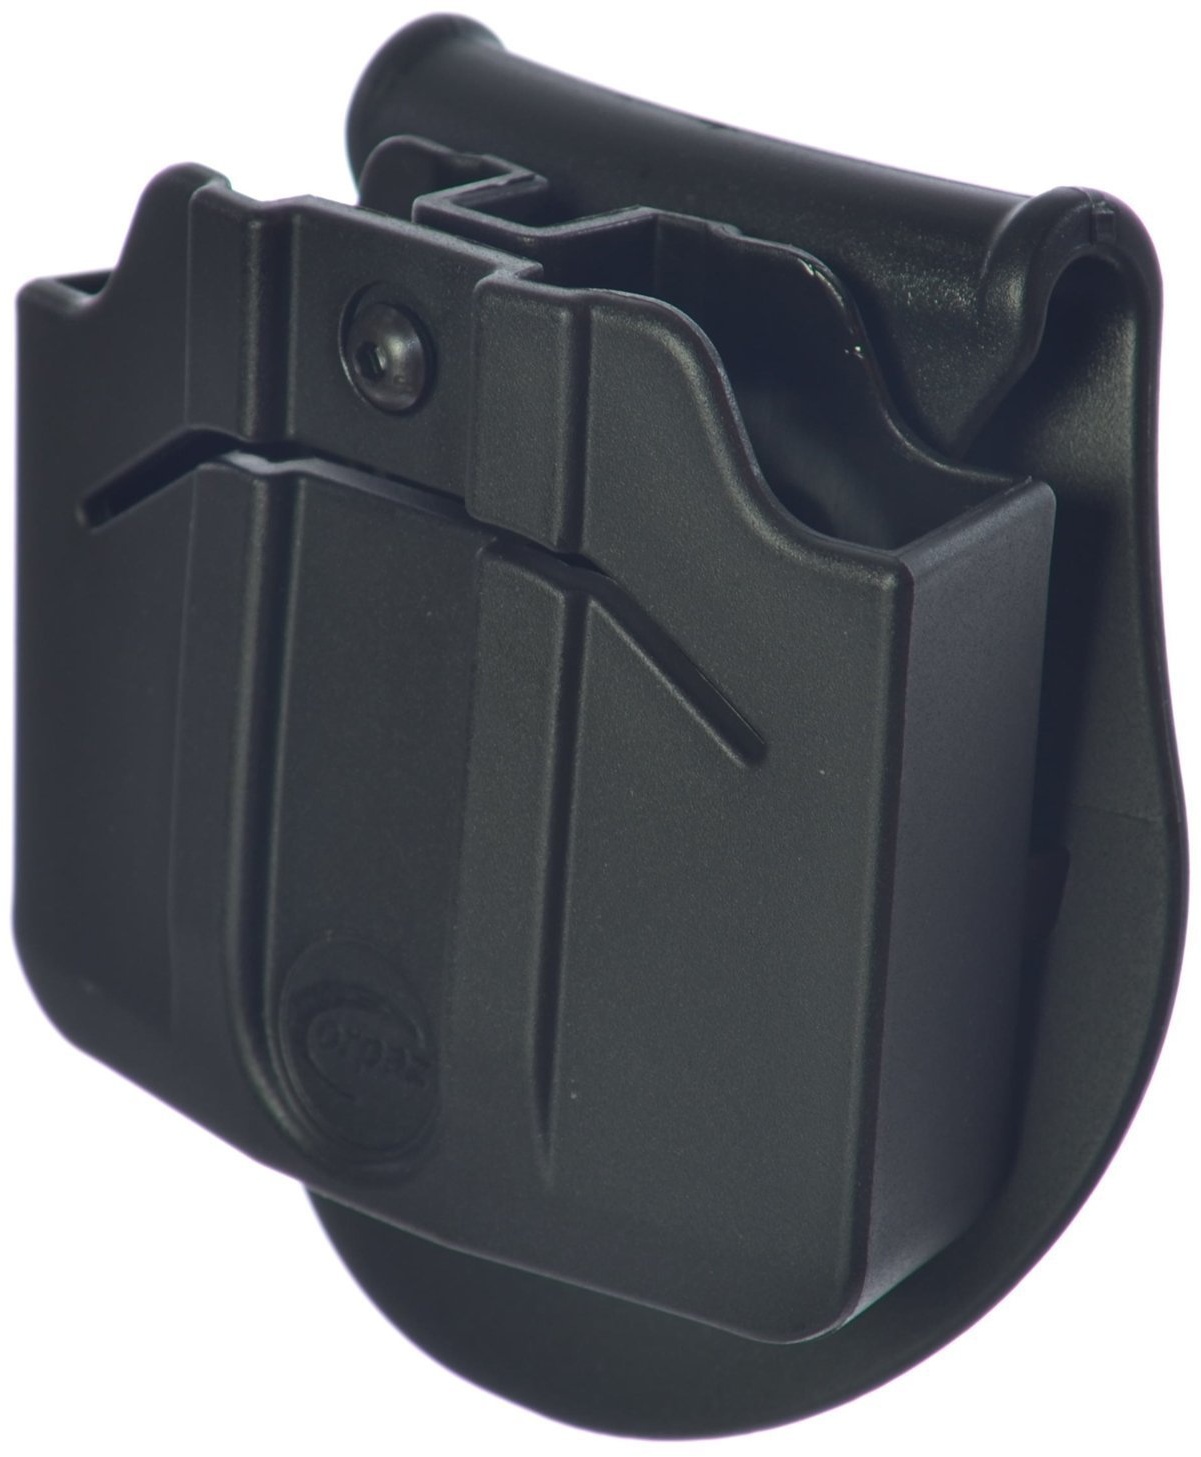 ORPAZ Defense Tactical Adjustable 360 Rotation, Retention Double Magazine Pouch Paddle Holster for Glock 17-19-22-23-31-32-34-35-26-25